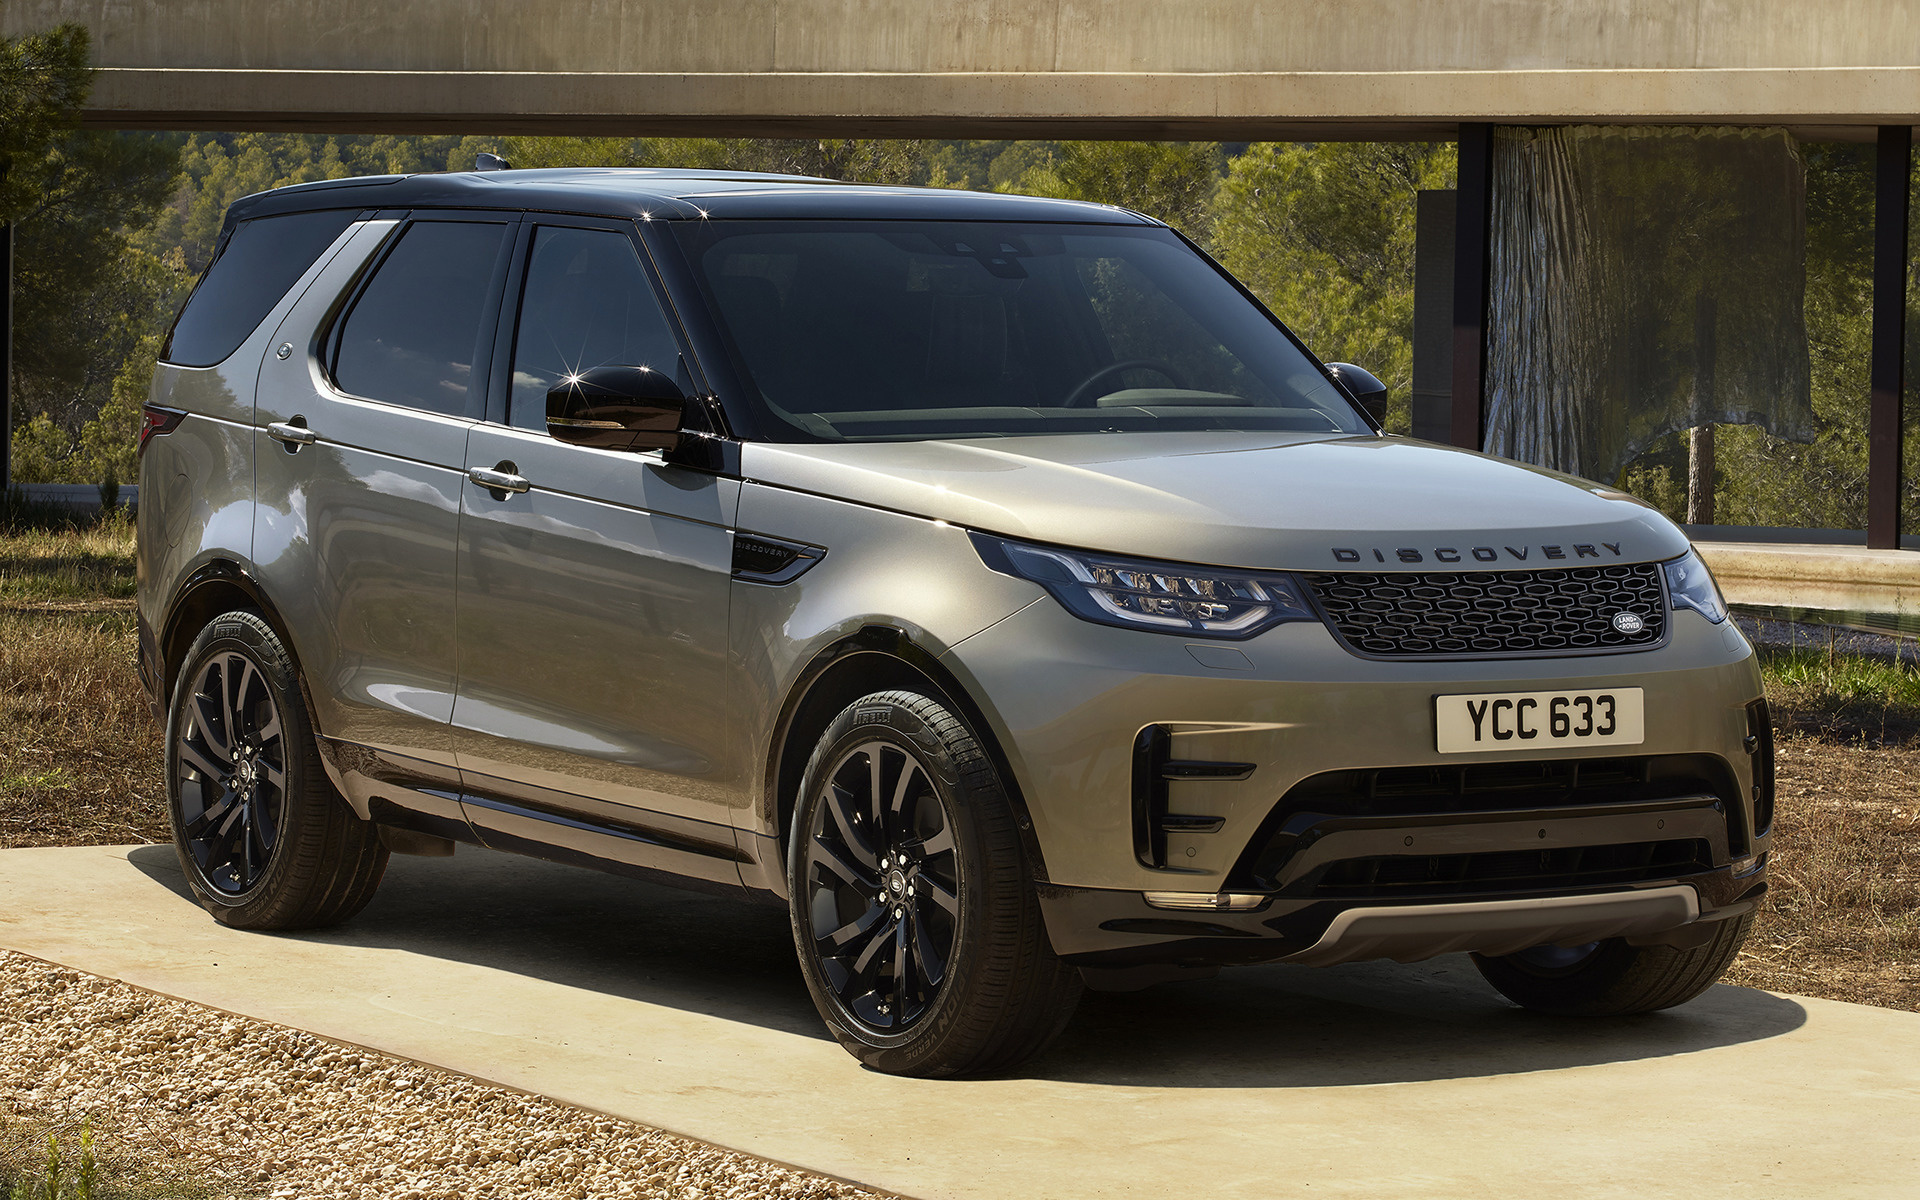 2019 Land Rover Discovery Landmark Wallpapers and HD